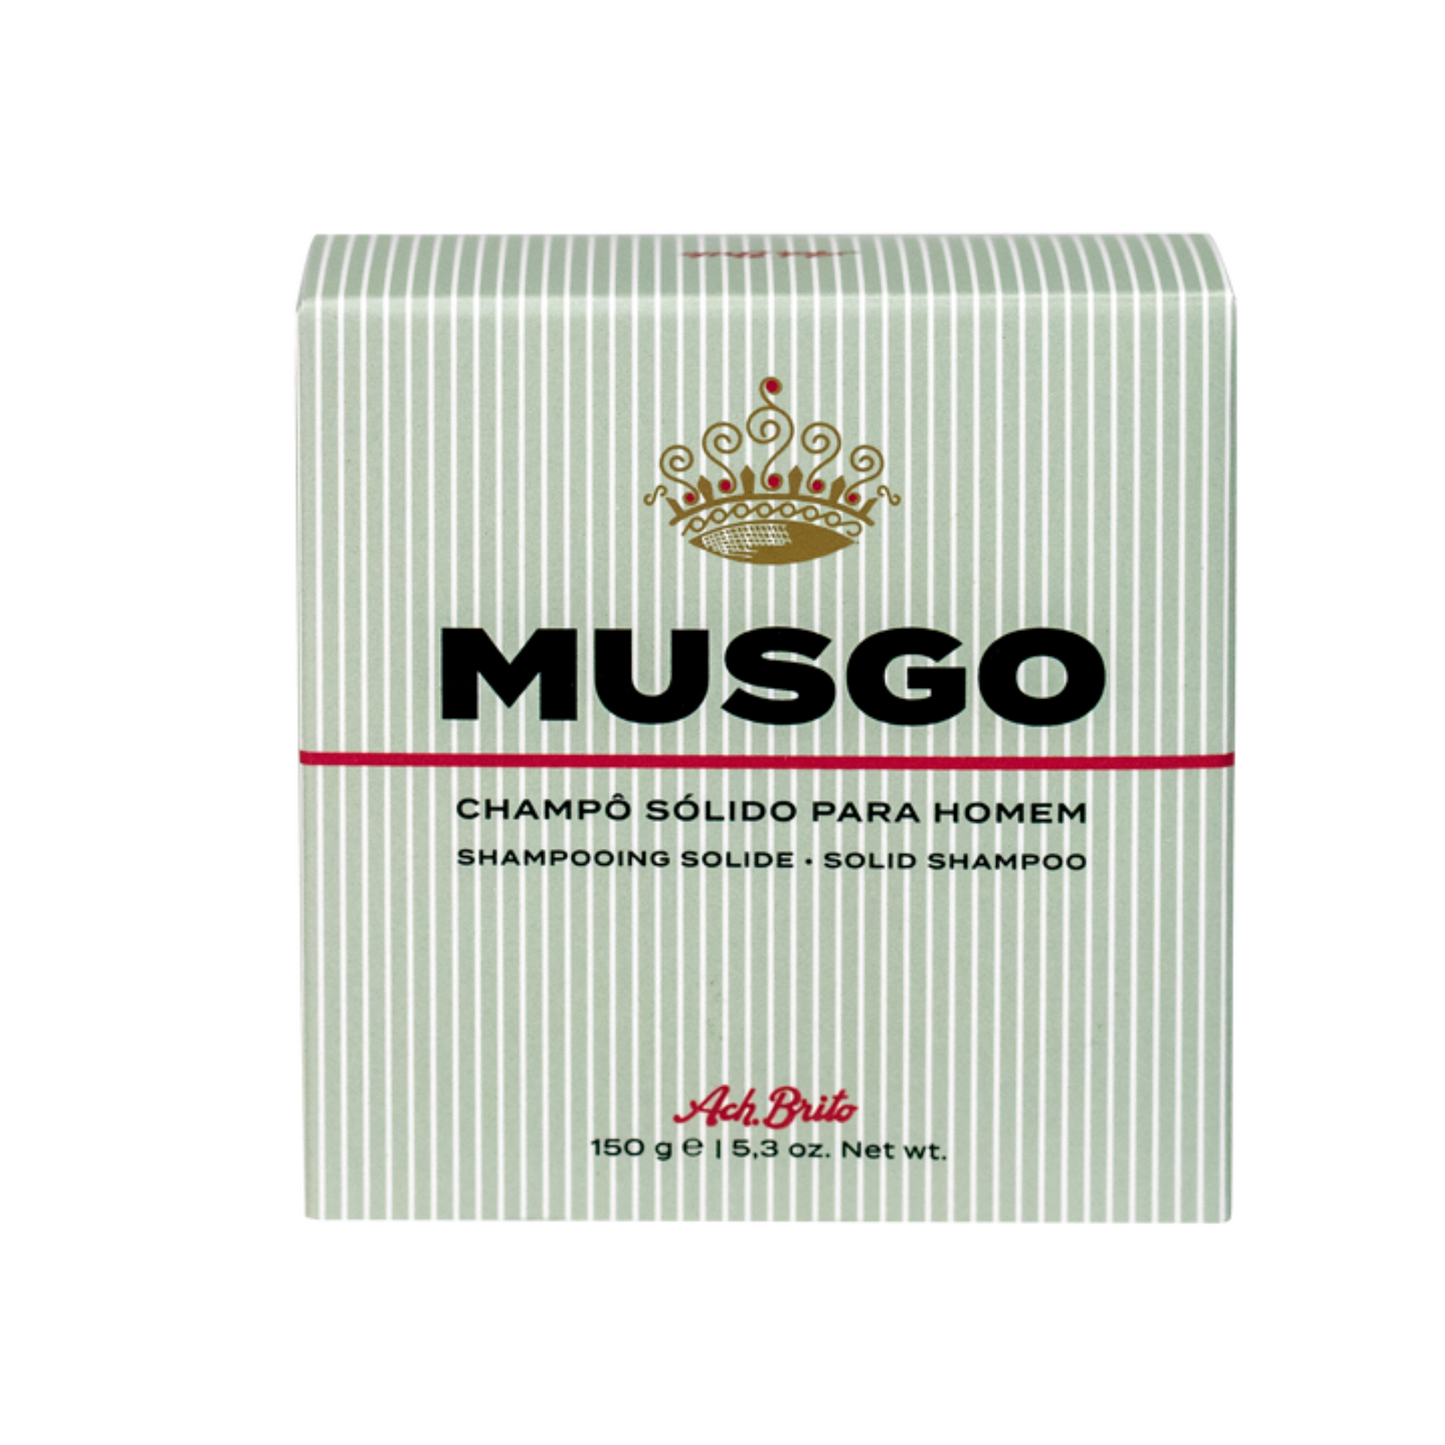 Primary Image of Musgo-Real-Solid-Shampoo-Bar